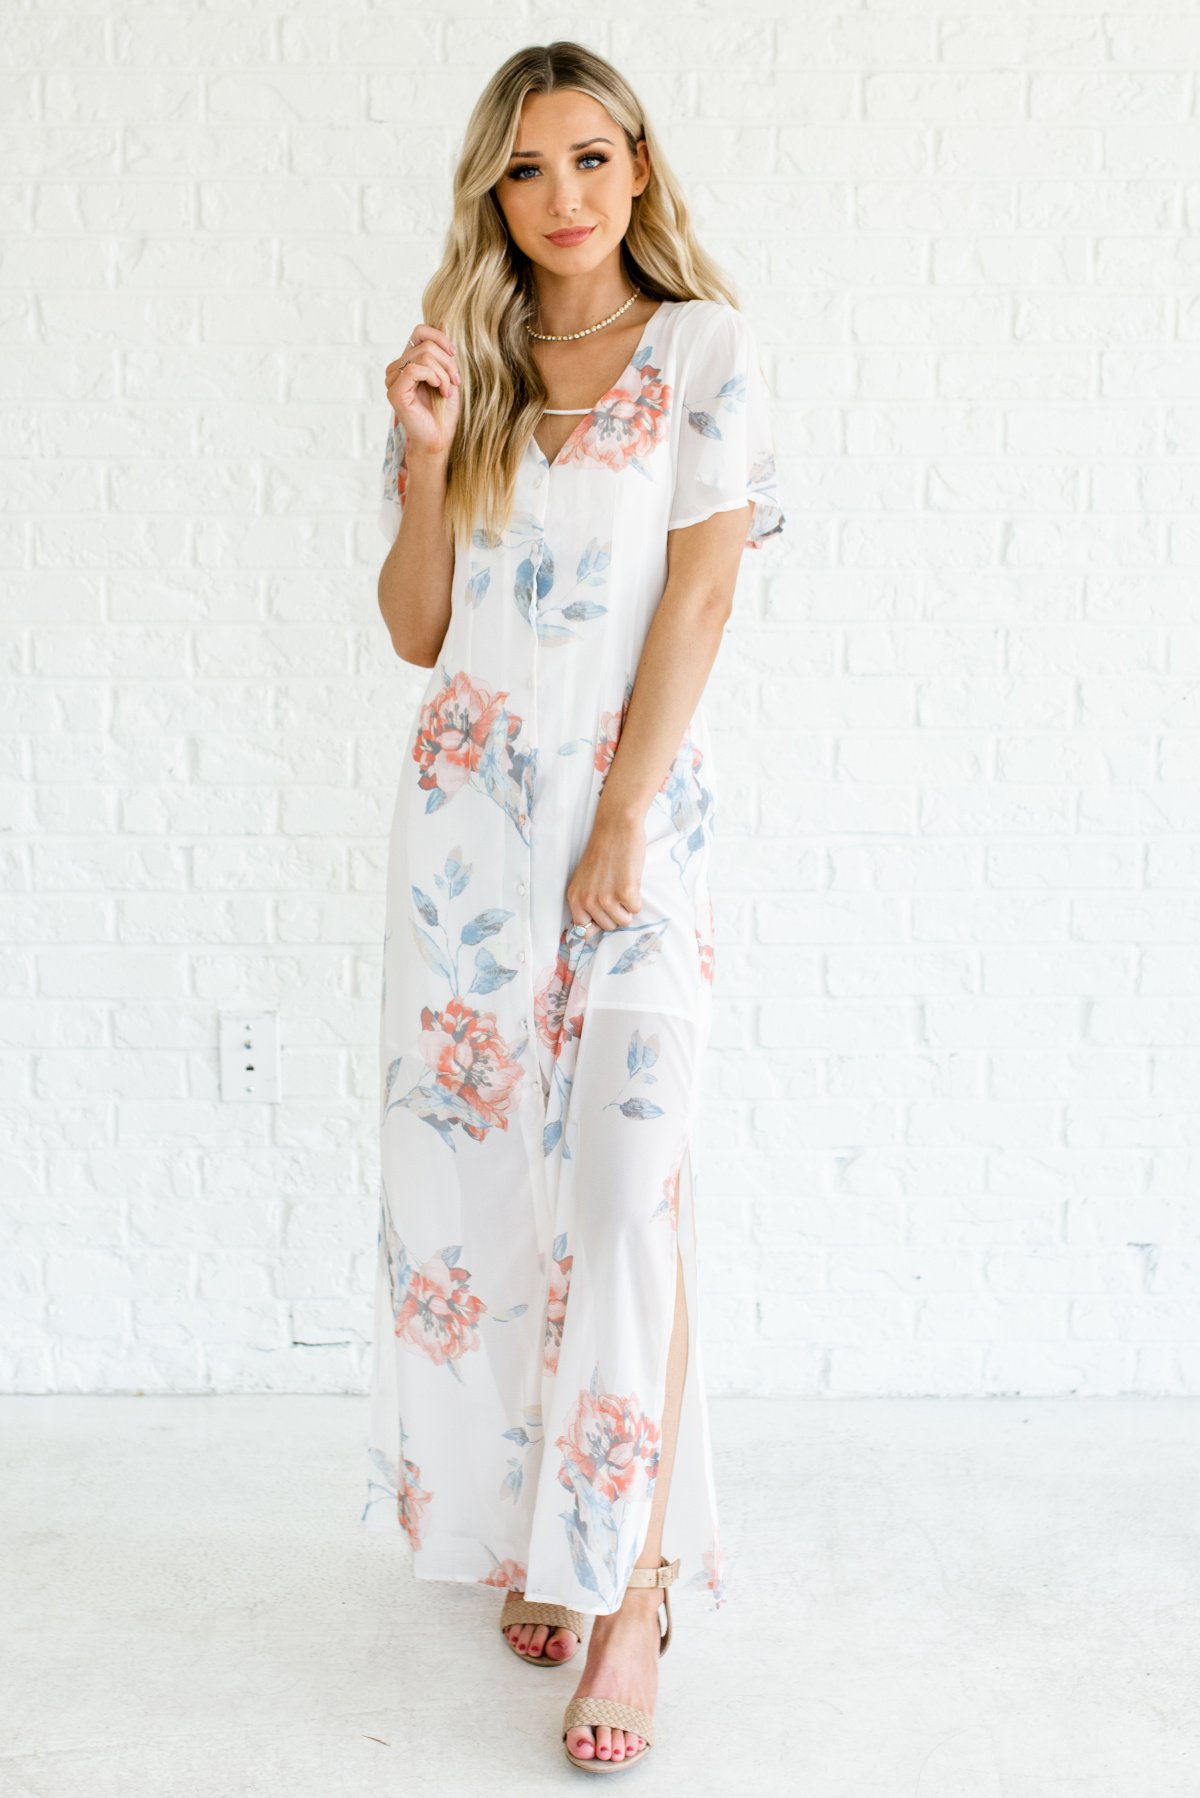 Peaceful_Mornings_White_Floral_Maxi_Dress_Full_Front_2000x.jpg